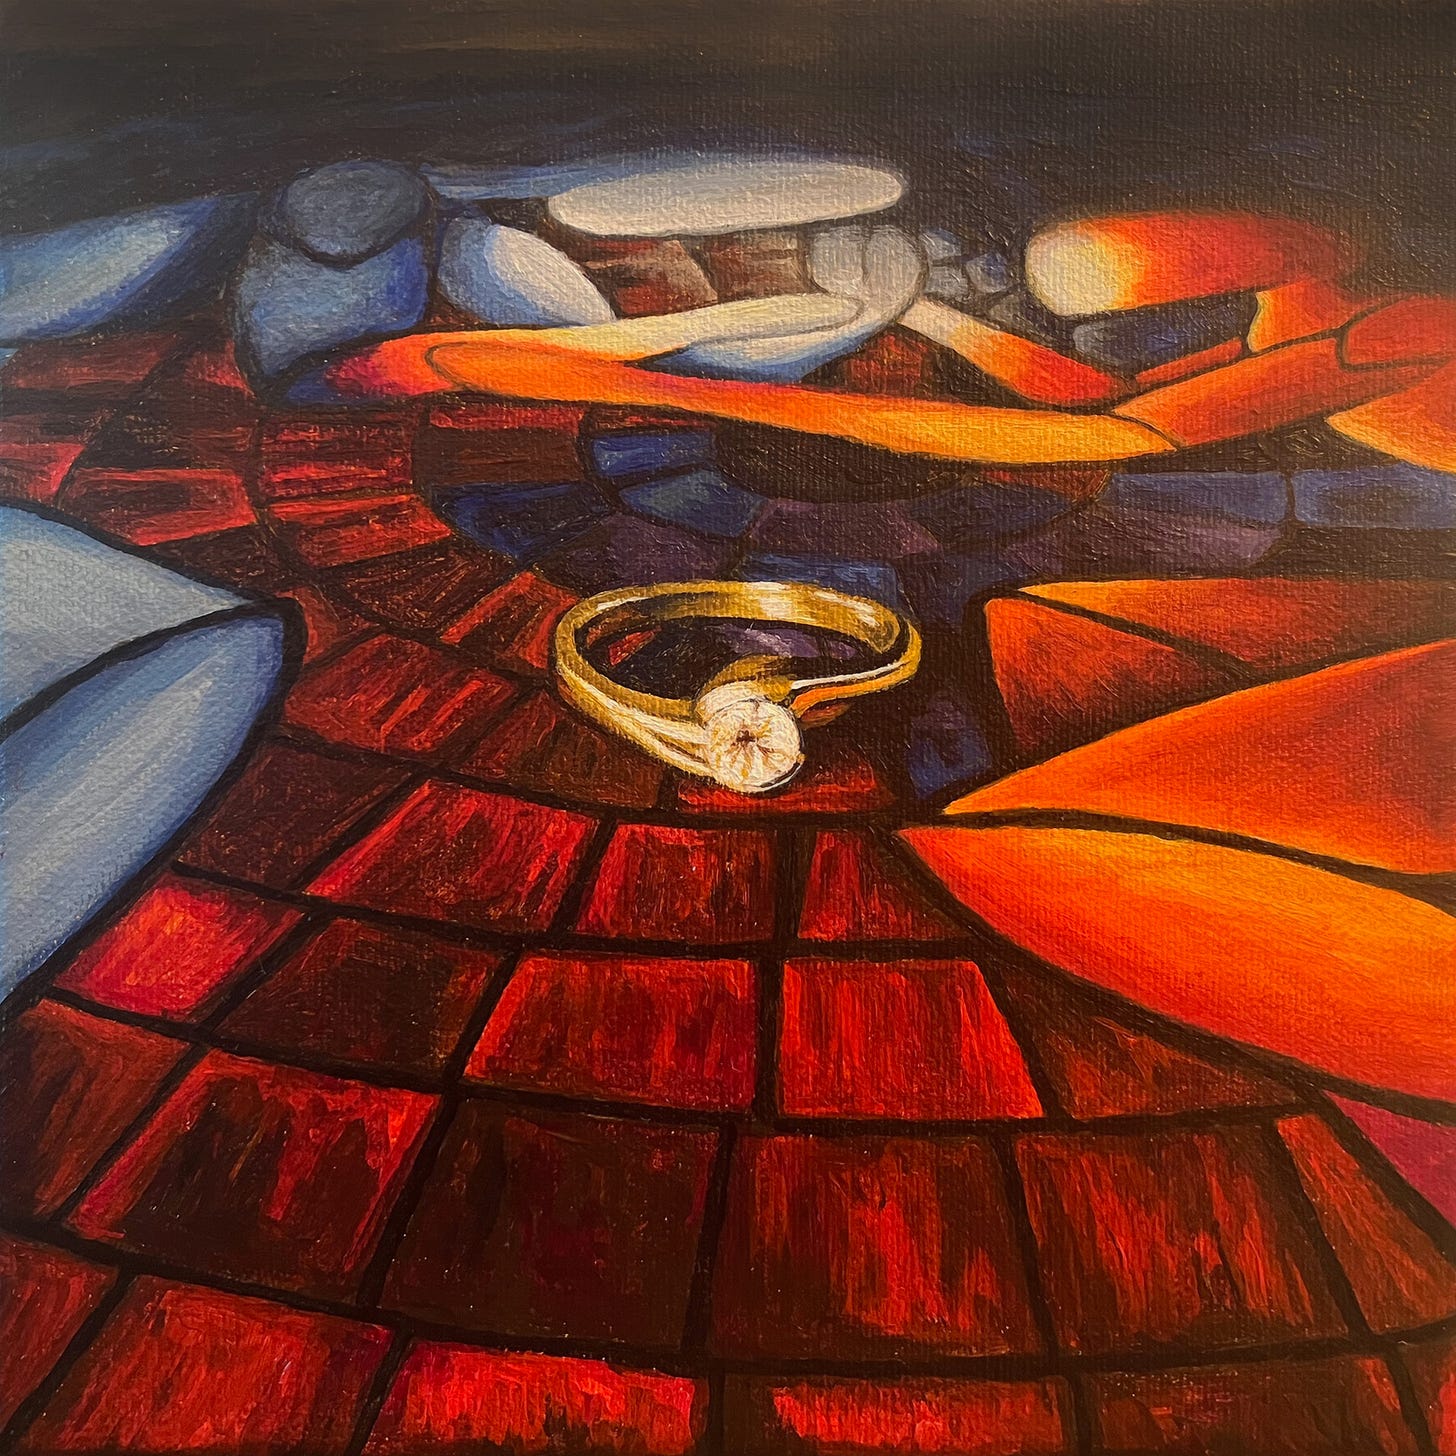 A painting of an engagement ring with a single diamond embraced by stylized golden curves. The ring sits atop the now familiar painting of the blue and orange figures. The painting lies flat on an unseen surface such that it is distorted in perspective and appears to stretch out to the horizon.